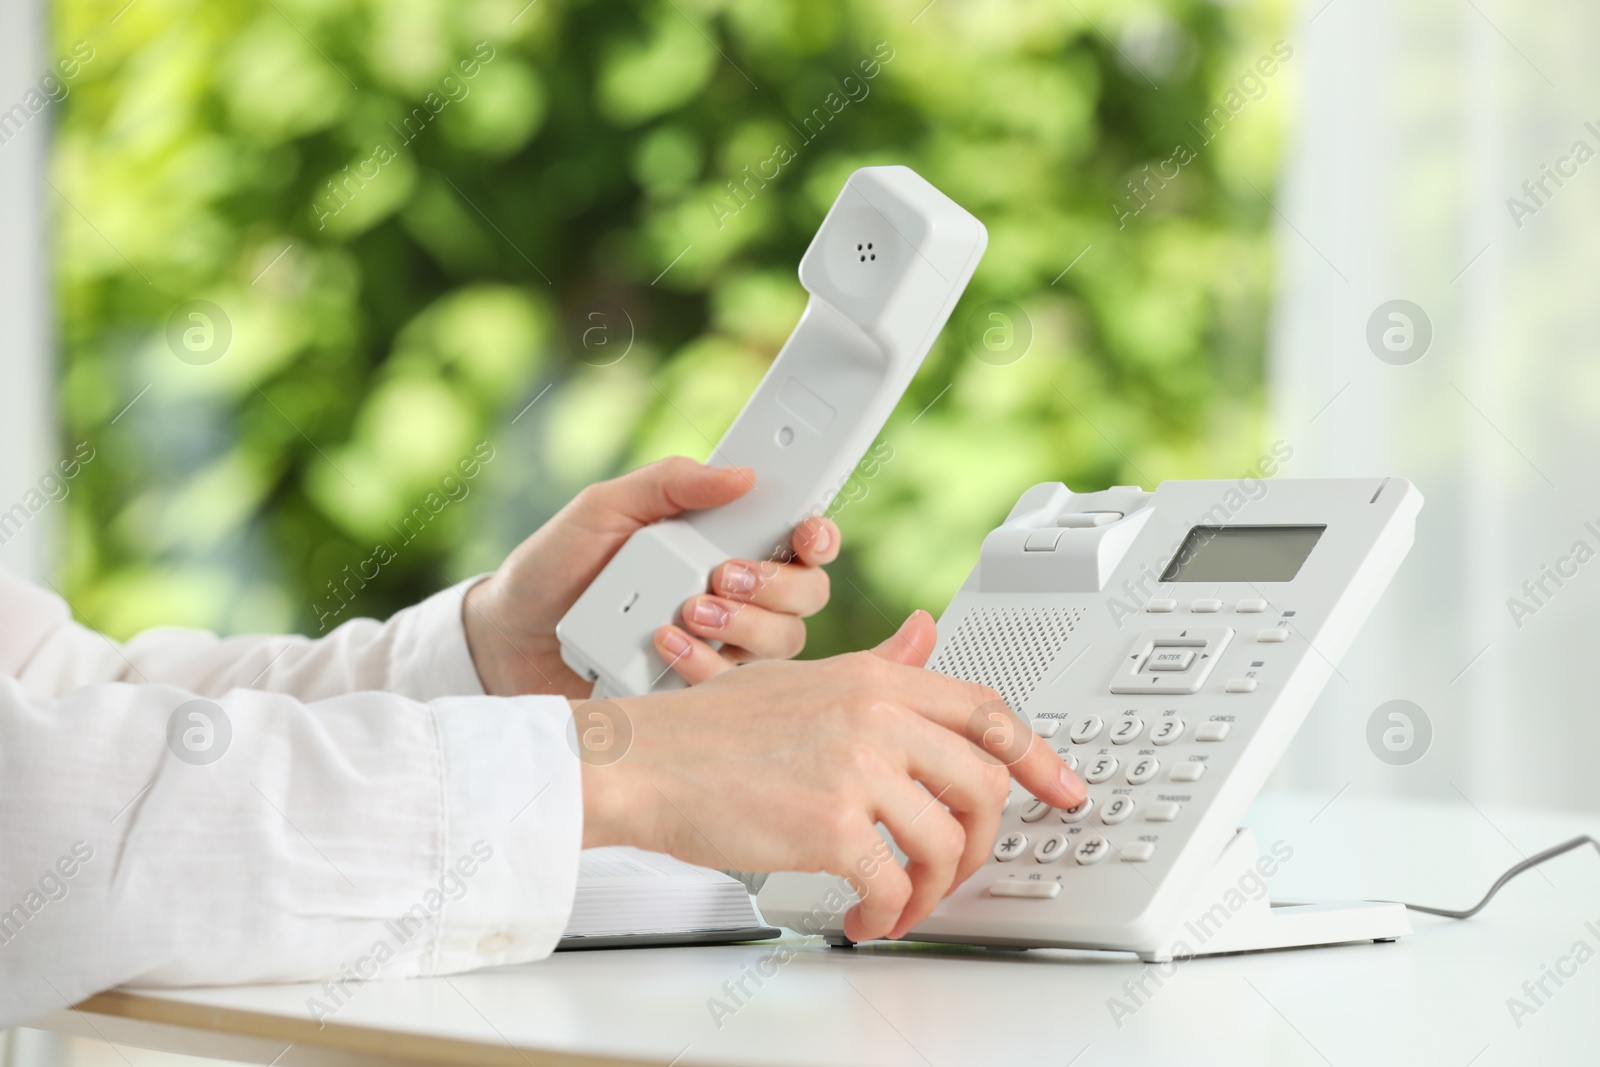 Photo of Assistant dialing number on telephone against blurred green background, closeup